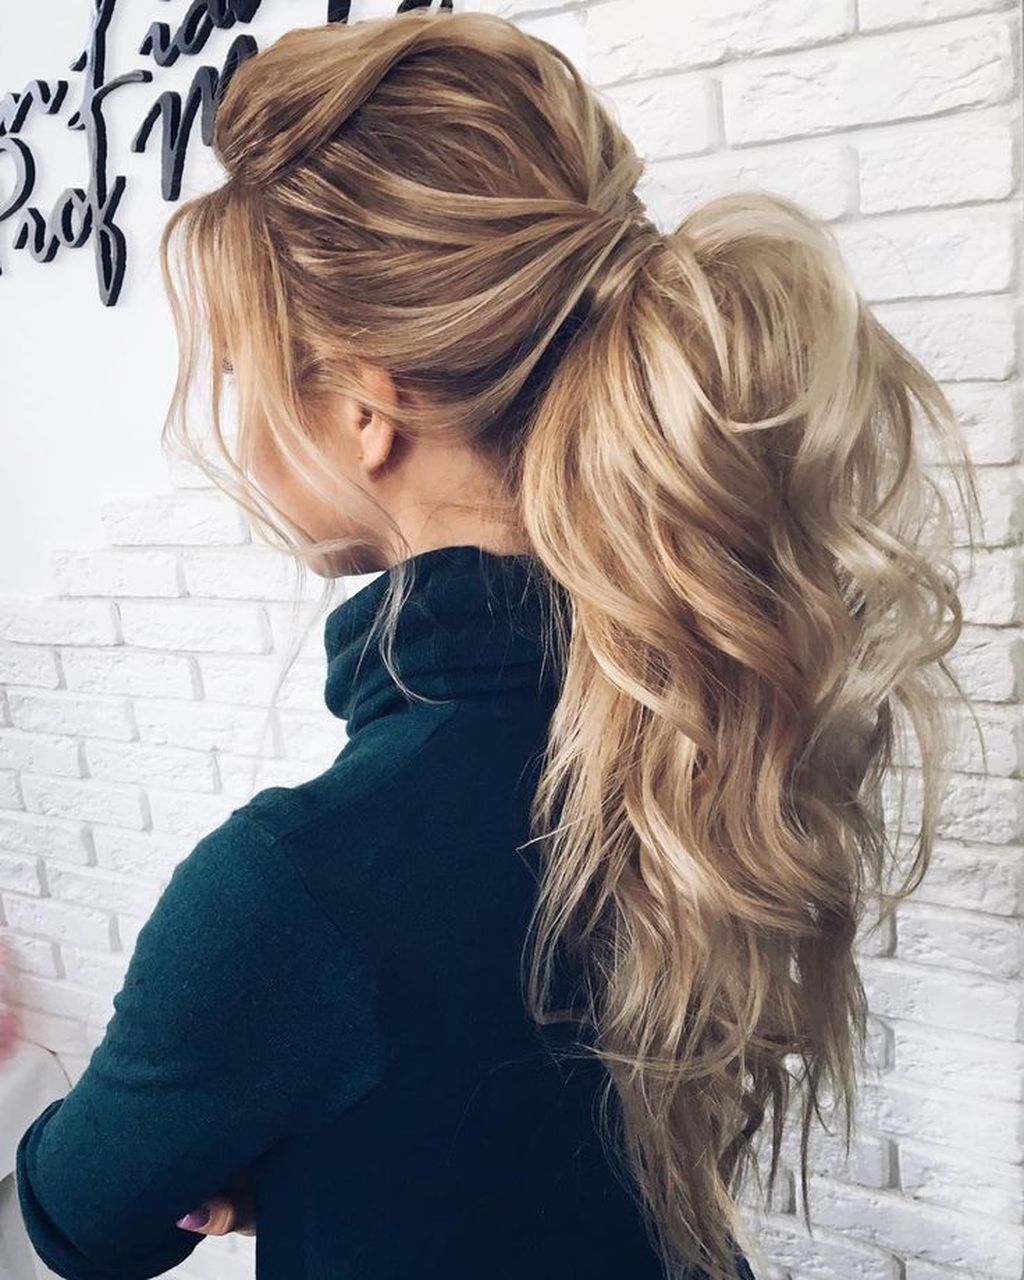 38 Charming Ponytail Hairstyles Ideas With Sophisticated Vibe - ADDICFASHION -   13 hairstyles Summer ponytail ideas